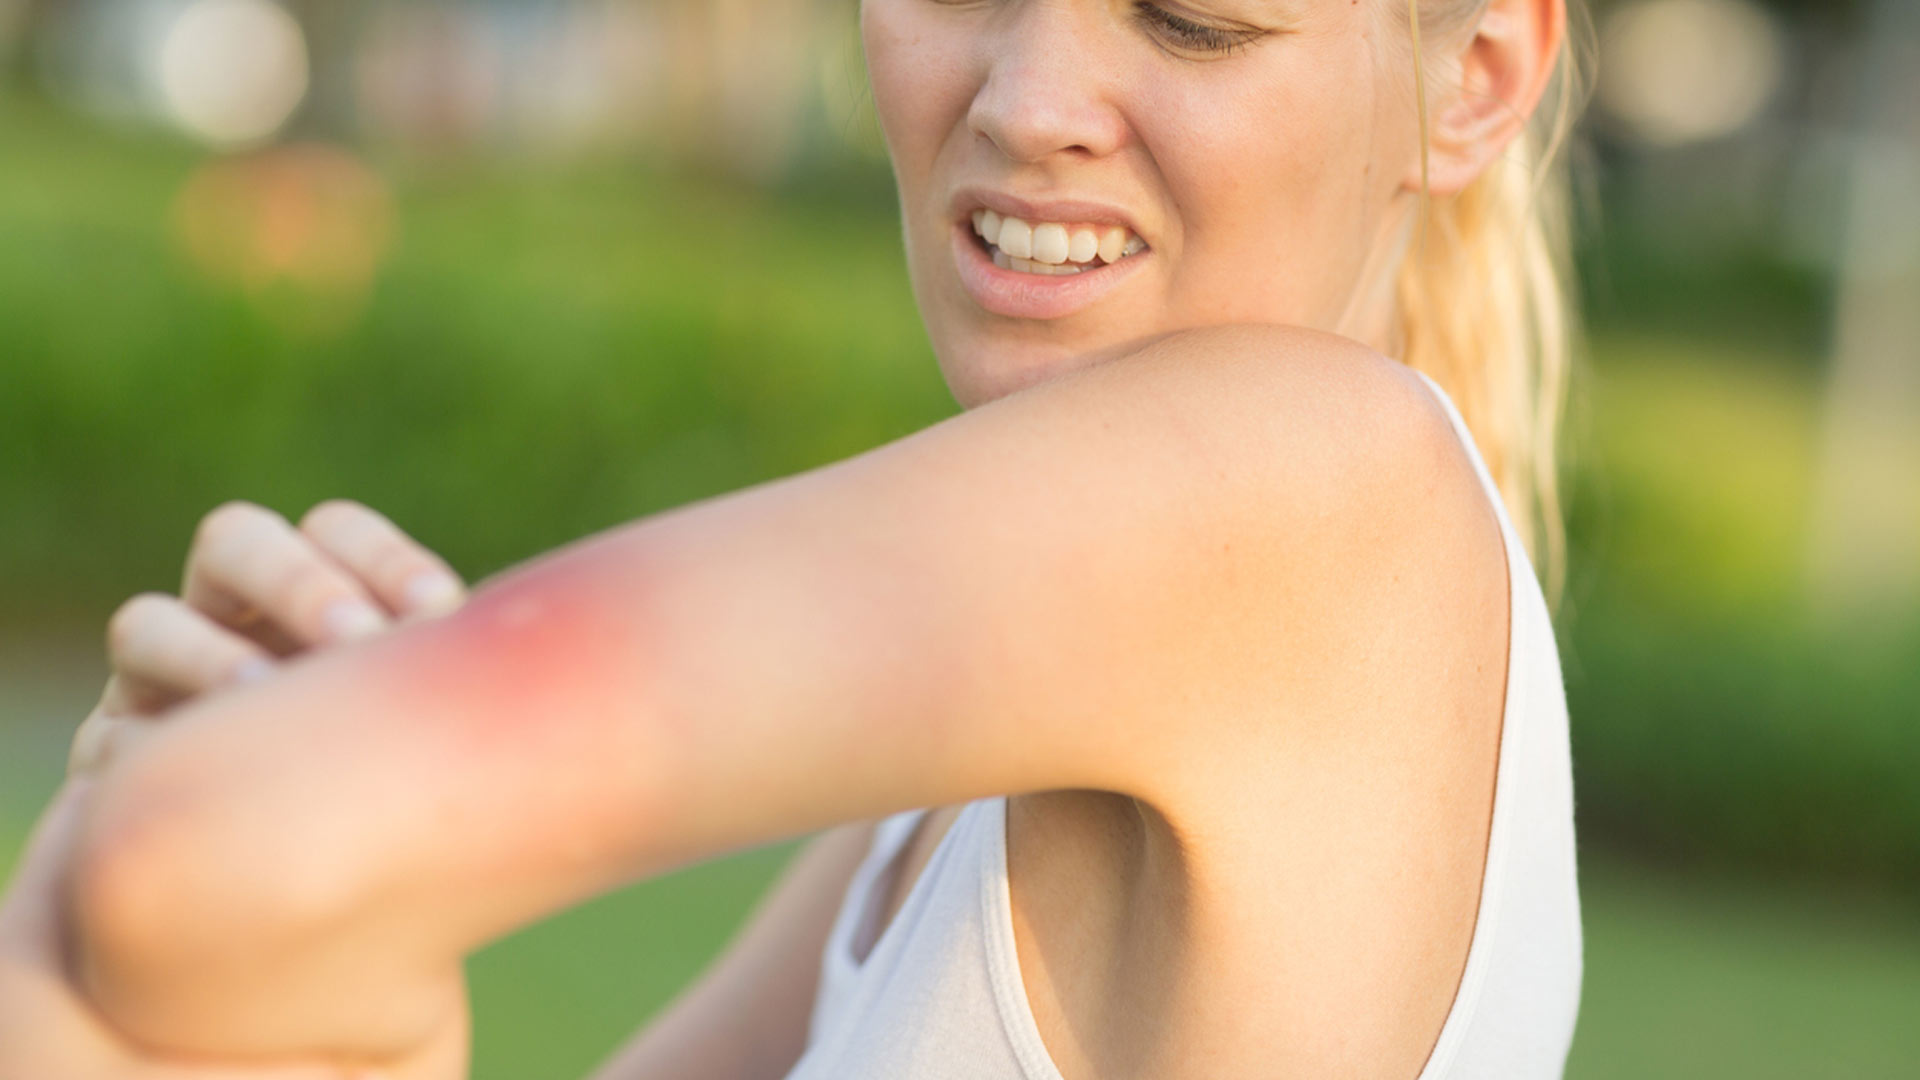 blonde woman with bad mosquito bite on her arm